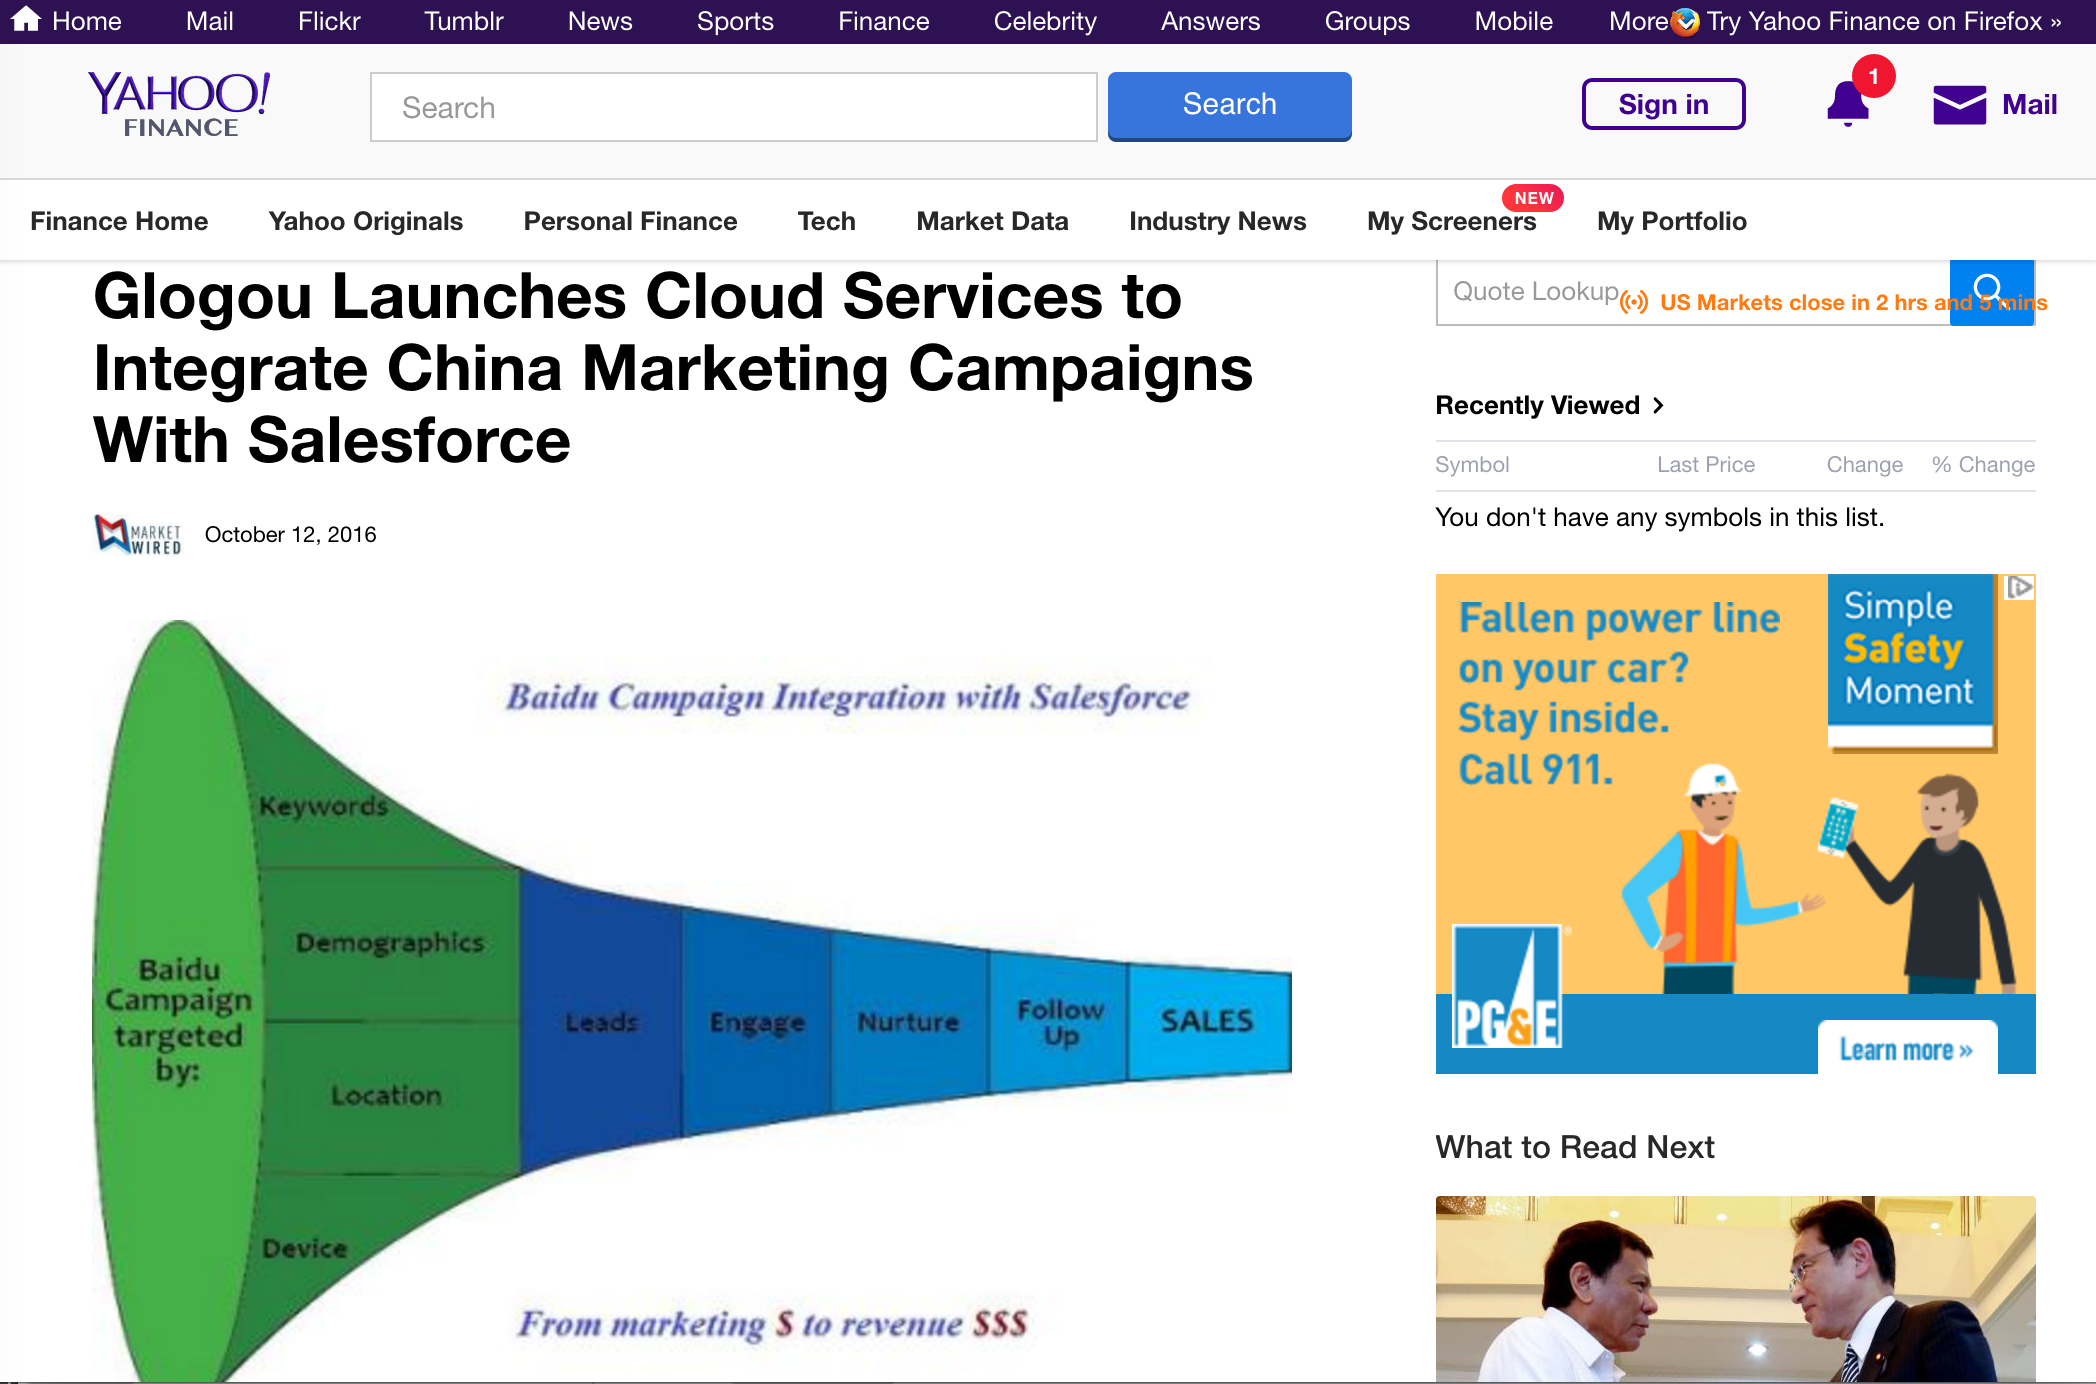 Glogou Launches Cloud Services to Integrate China Marketing Campaigns With Salesforce